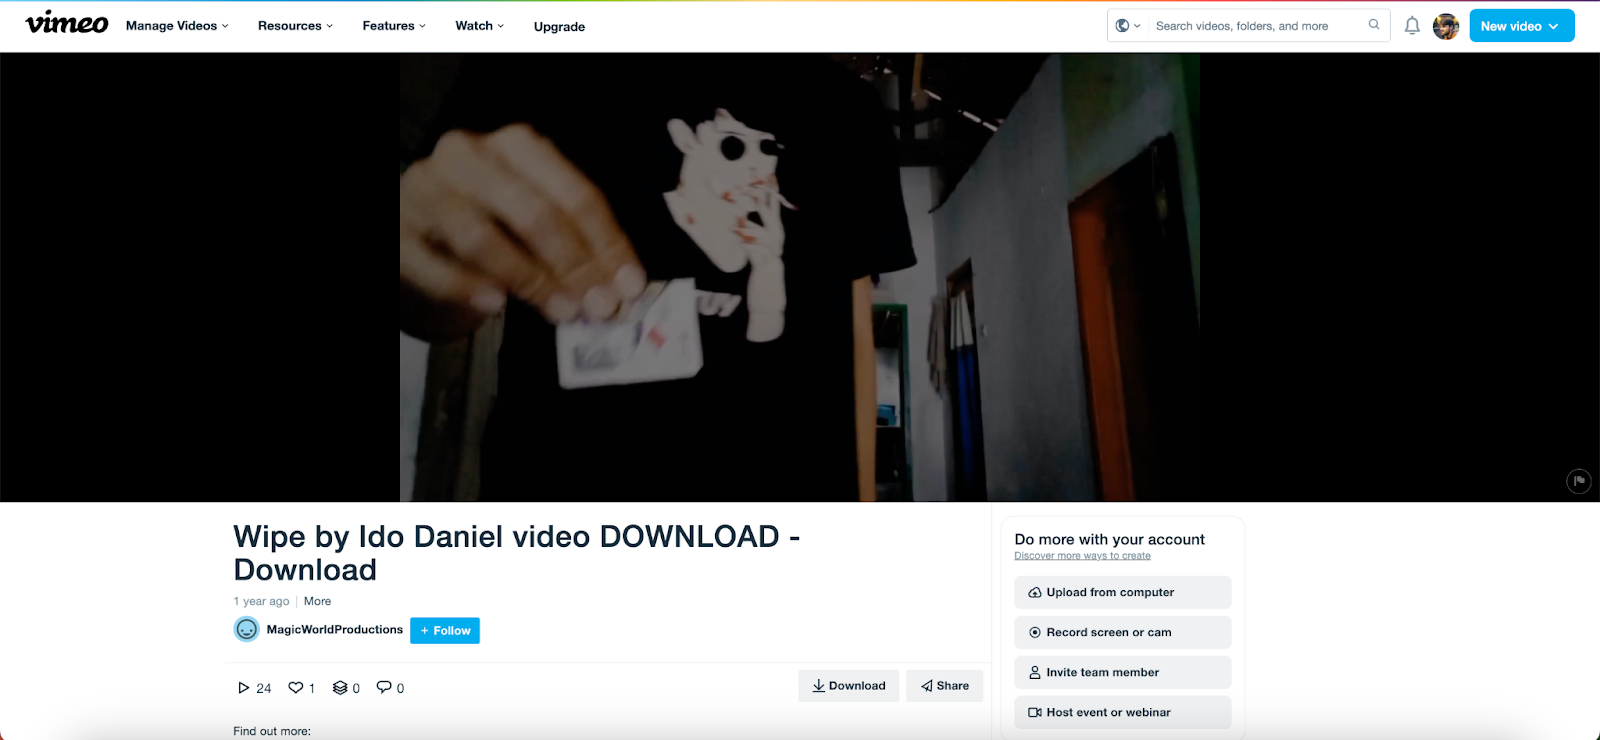 How to download Vimeo video